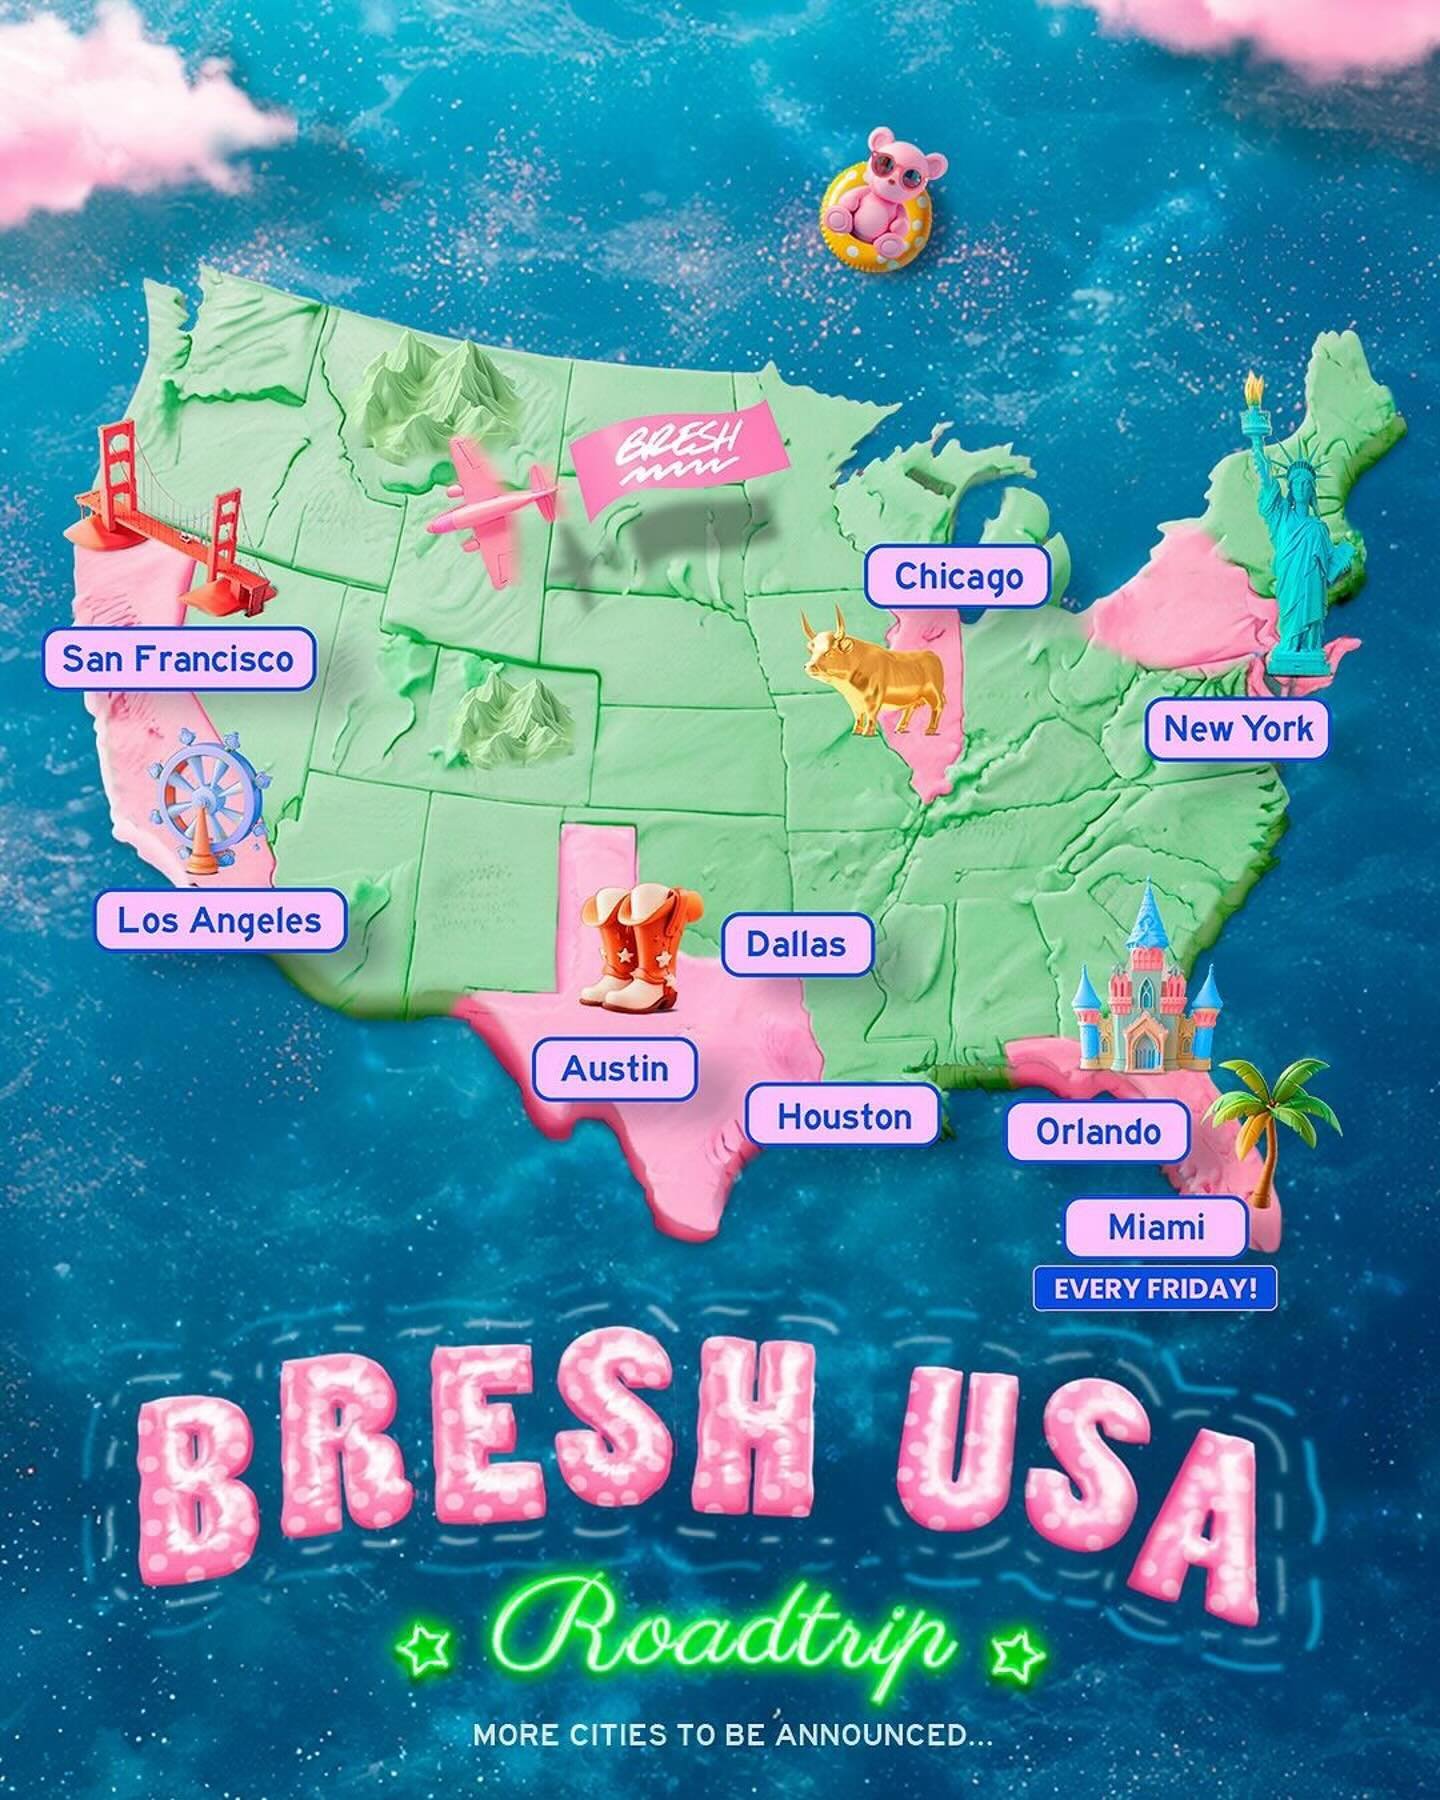 #Repost @bresh
・・・
FIRST EVER USA CROSSCOUNTRY ROADTRIP 🇺🇸🤯🌸💖✨

YES, THE MOST BEAUTIFUL PARTY IN THE WORLD FOR THE FIRST TIME EVER ON AN INSANE ROADTRIP ACROSS USA: 

🌸 MIAMI, EVERY FRIDAY AT @M2_MIAMI 
🌸 ORLANDO: MAY 17TH AT @CELINE_ORLANDO 
